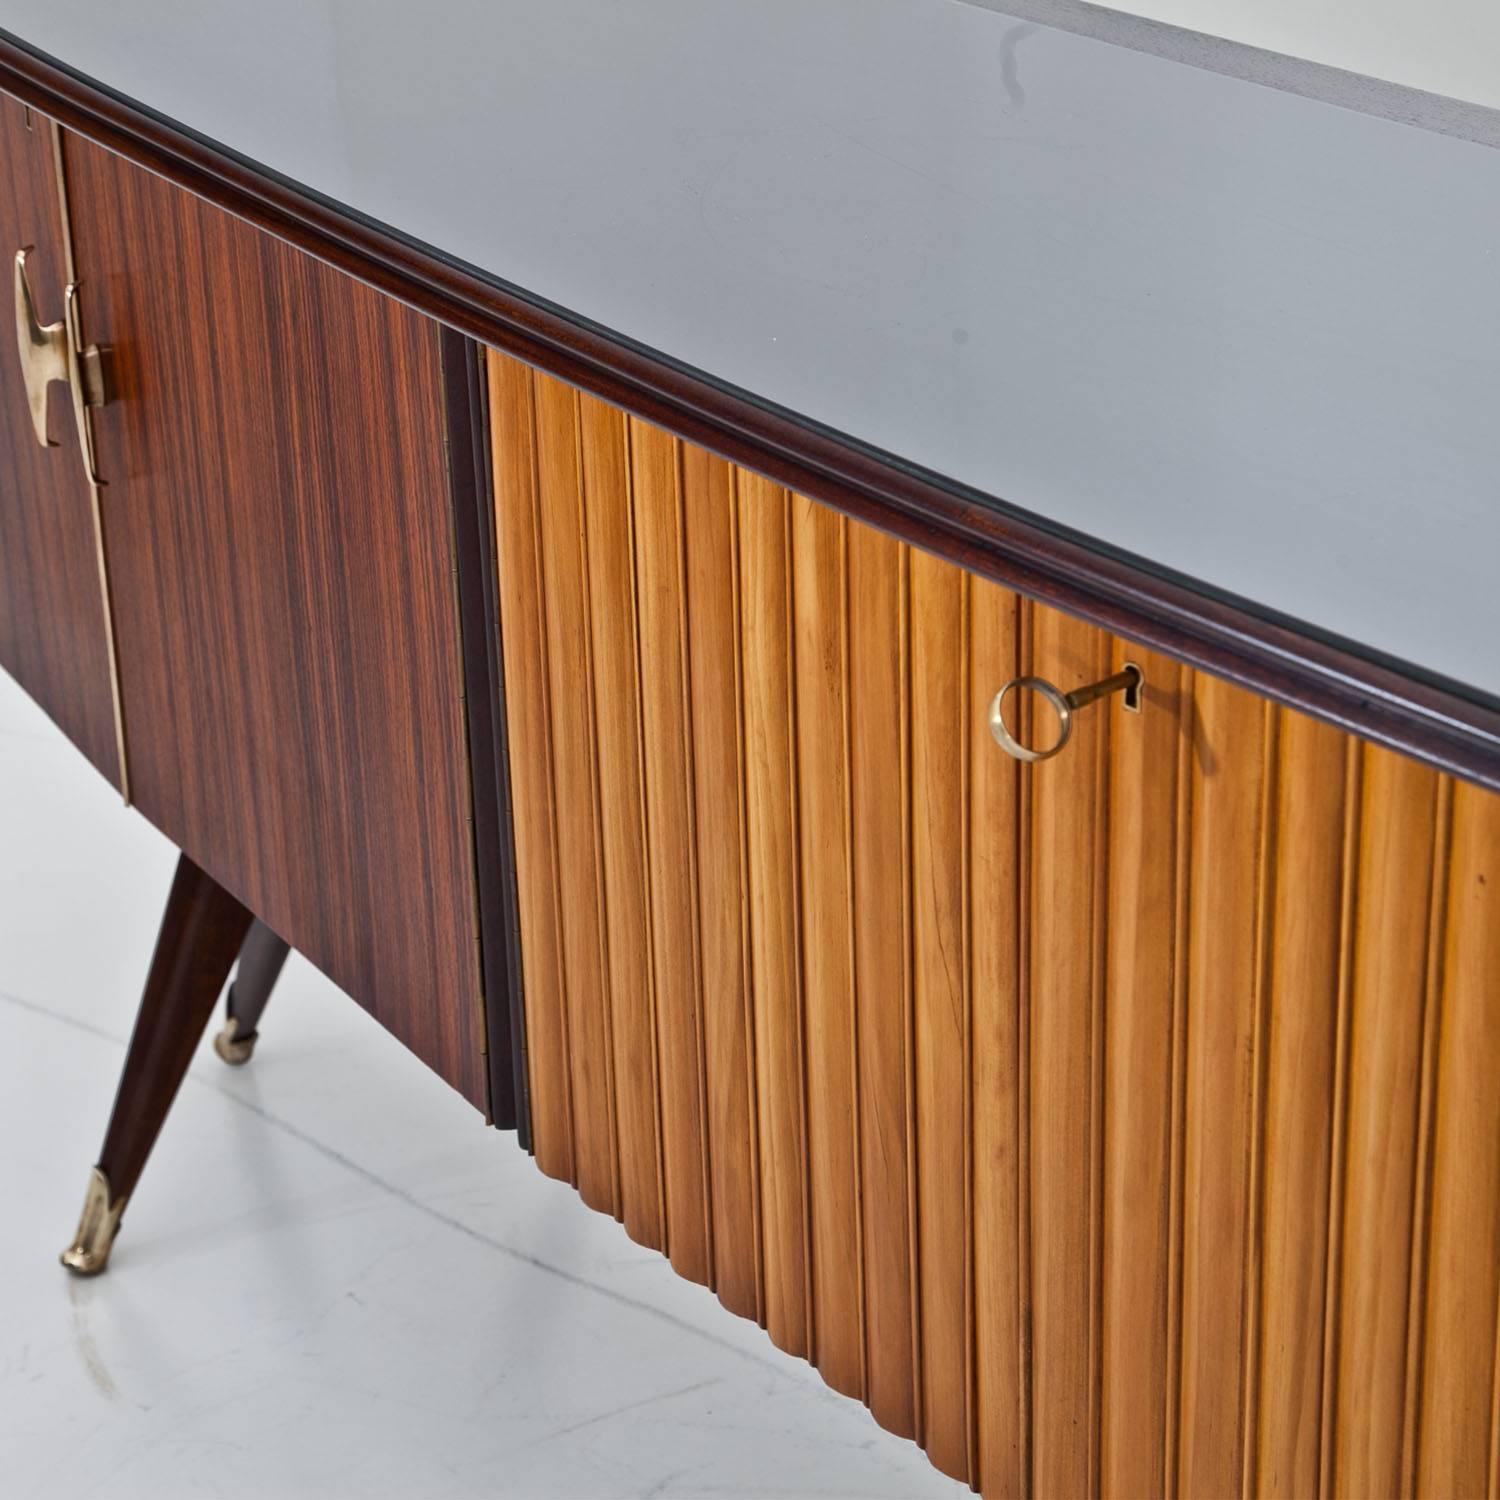 Italian Sideboard in the Style of Dassi, Italy Mid-20th Century